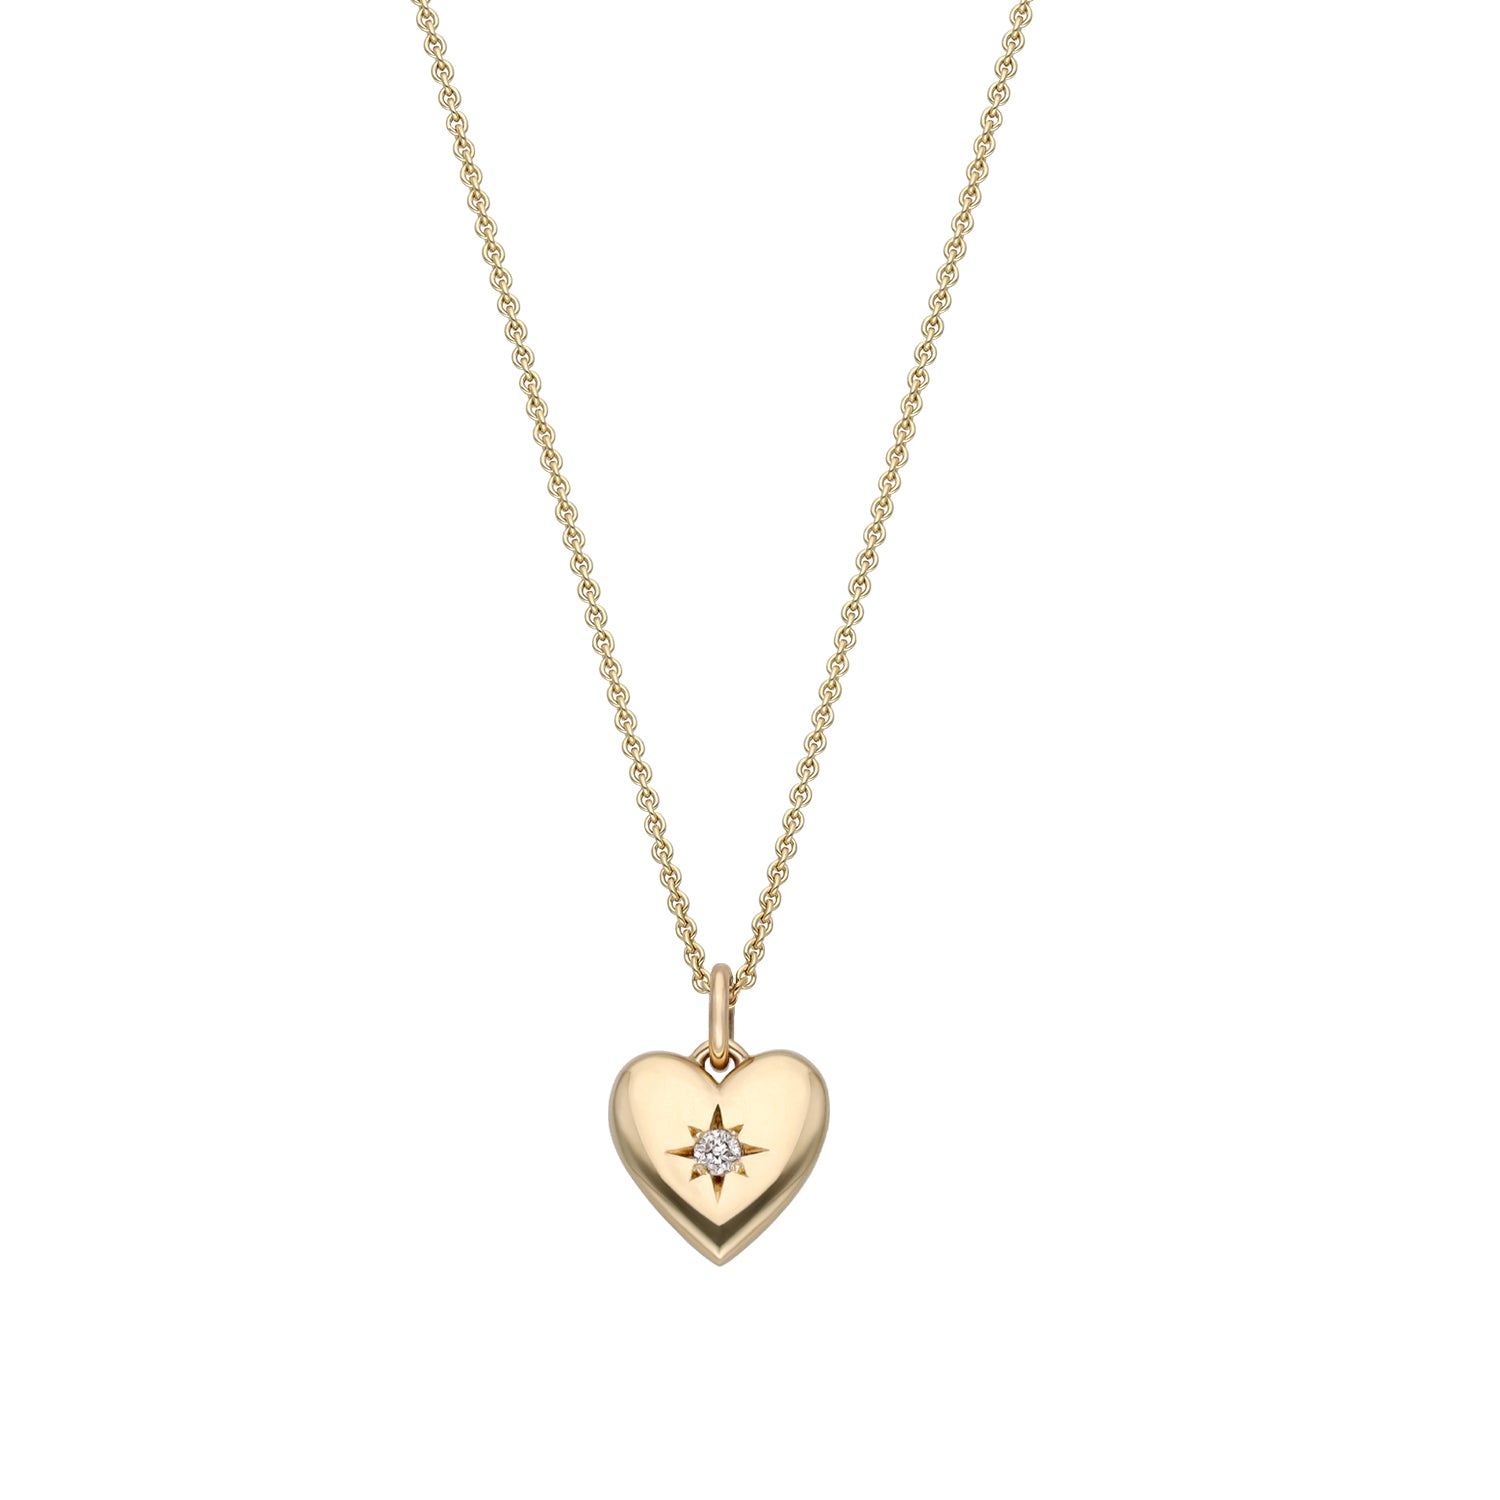 Gold heart made in Ireland